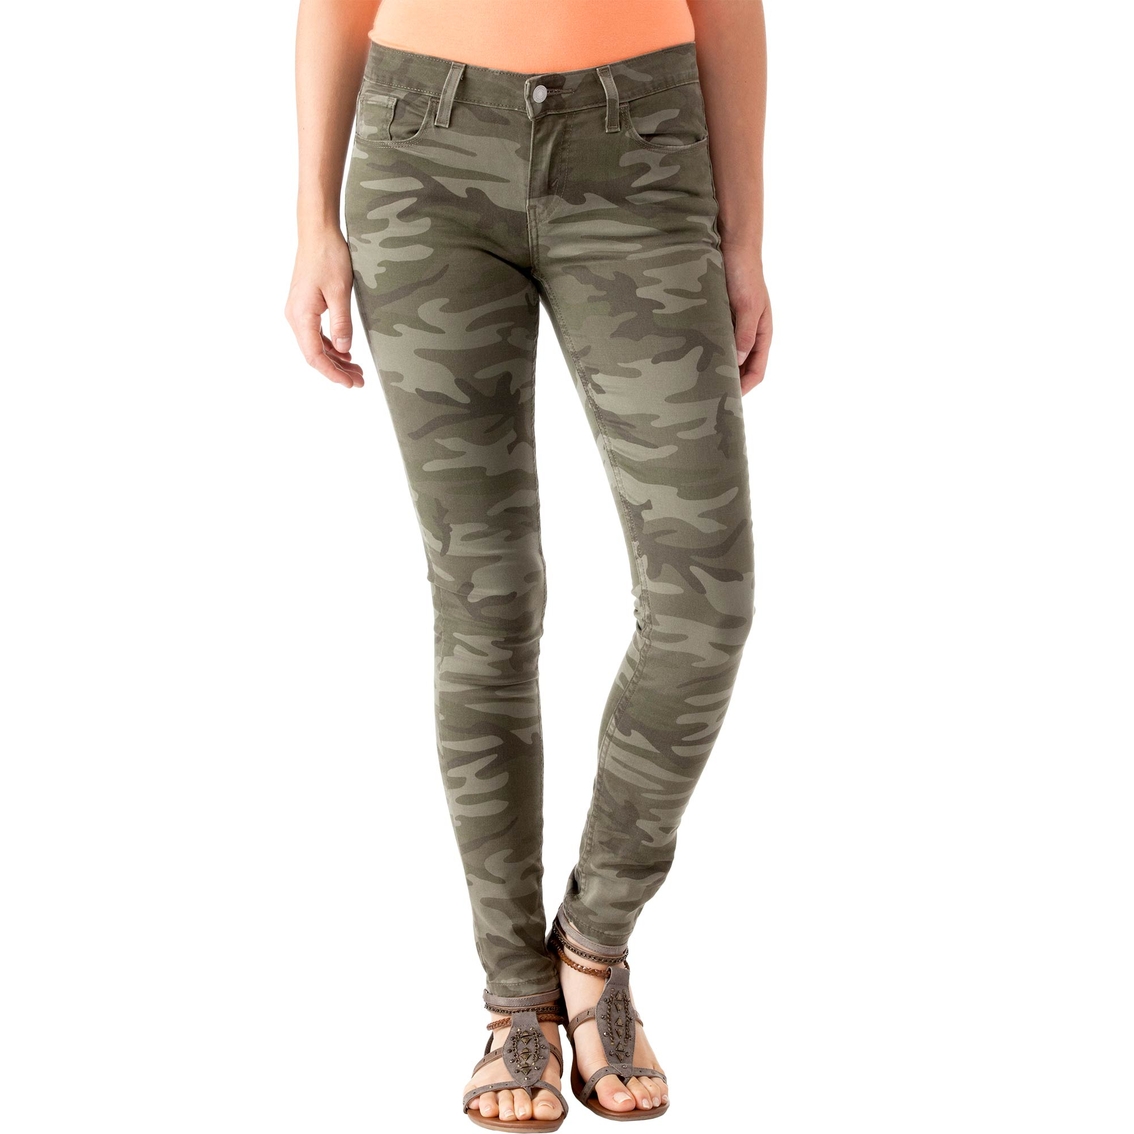 Levi's 535 Super Skinny Jeans, Camouflage | Jeans | Clothing & Accessories  | Shop The Exchange